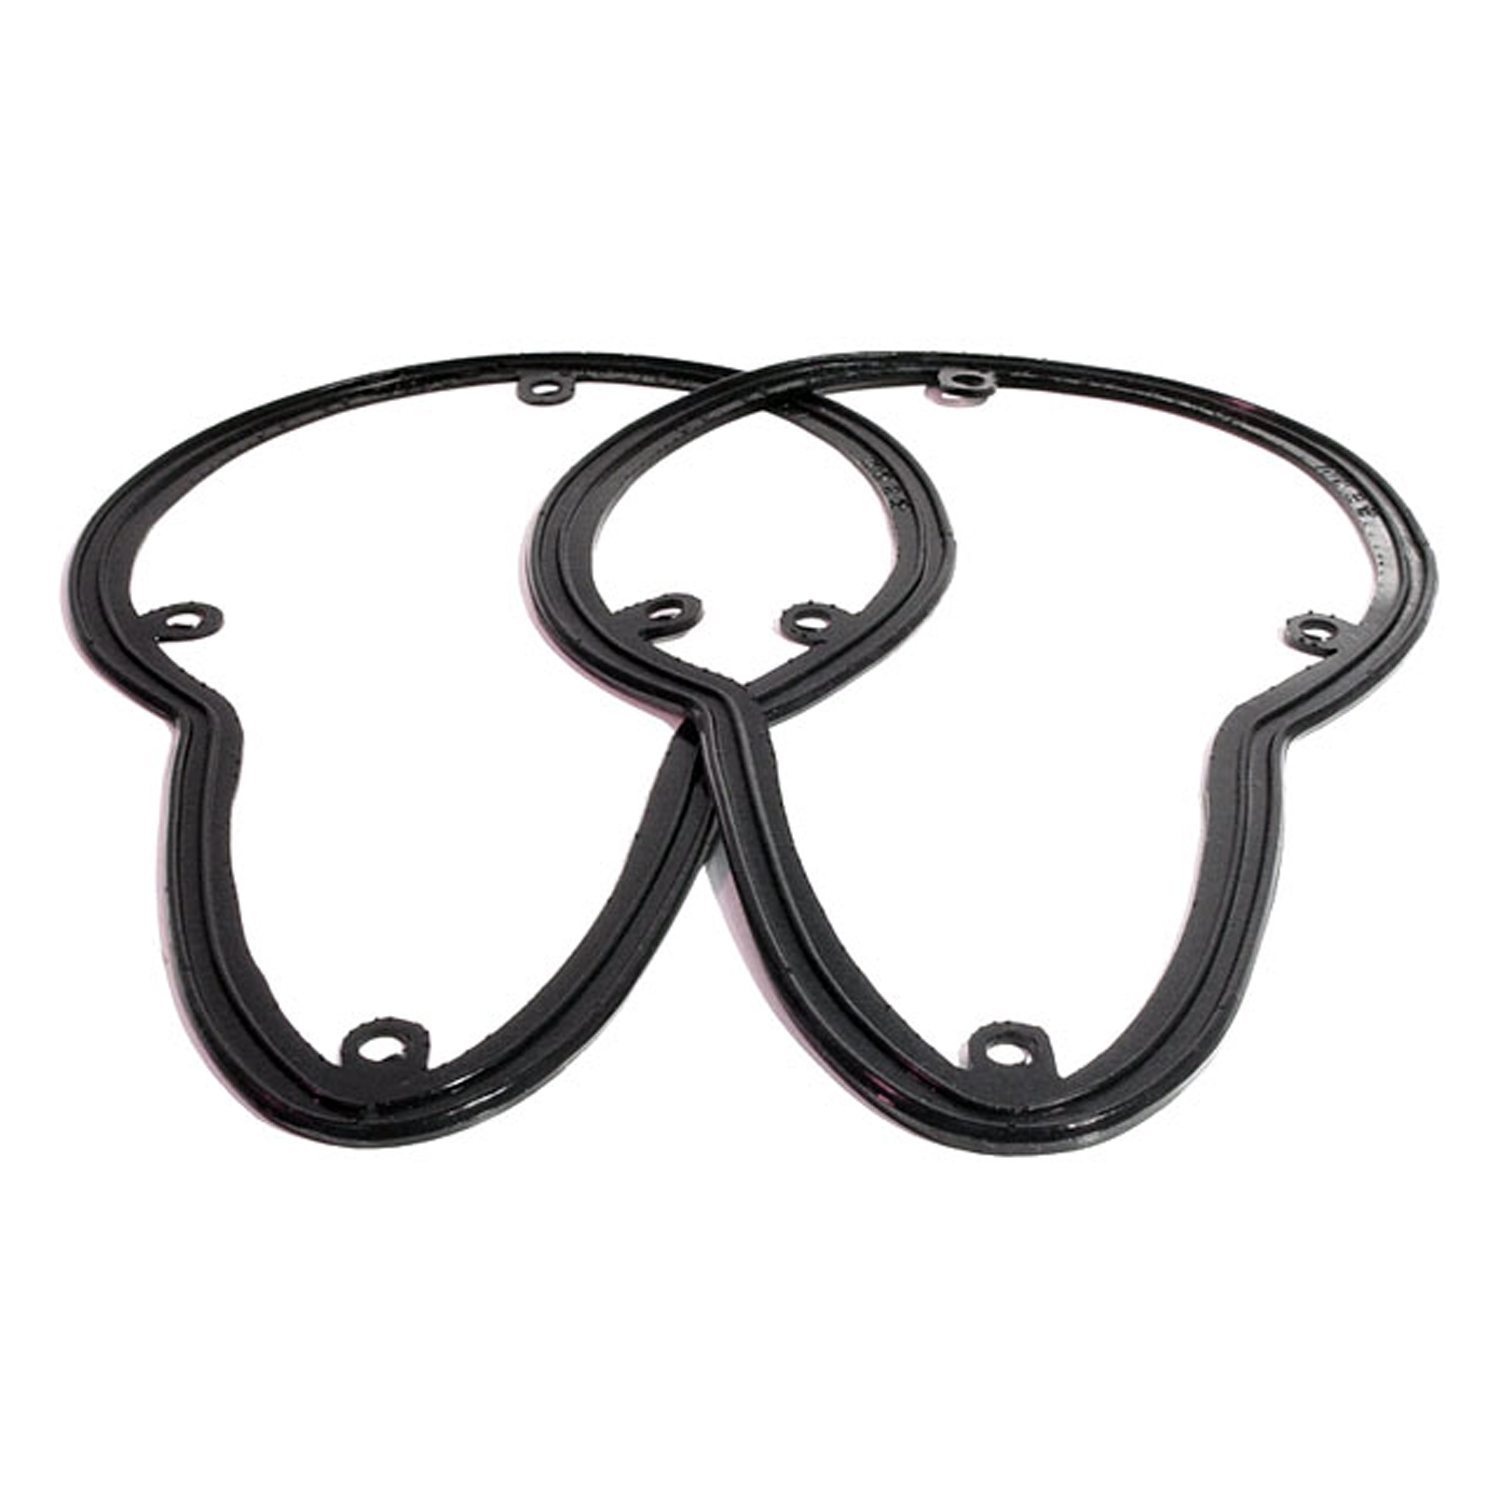 1956 Mercury Monterey Tail-light  Gaskets for Station Wagon.  8 wide X 12 long-MP 1009-G